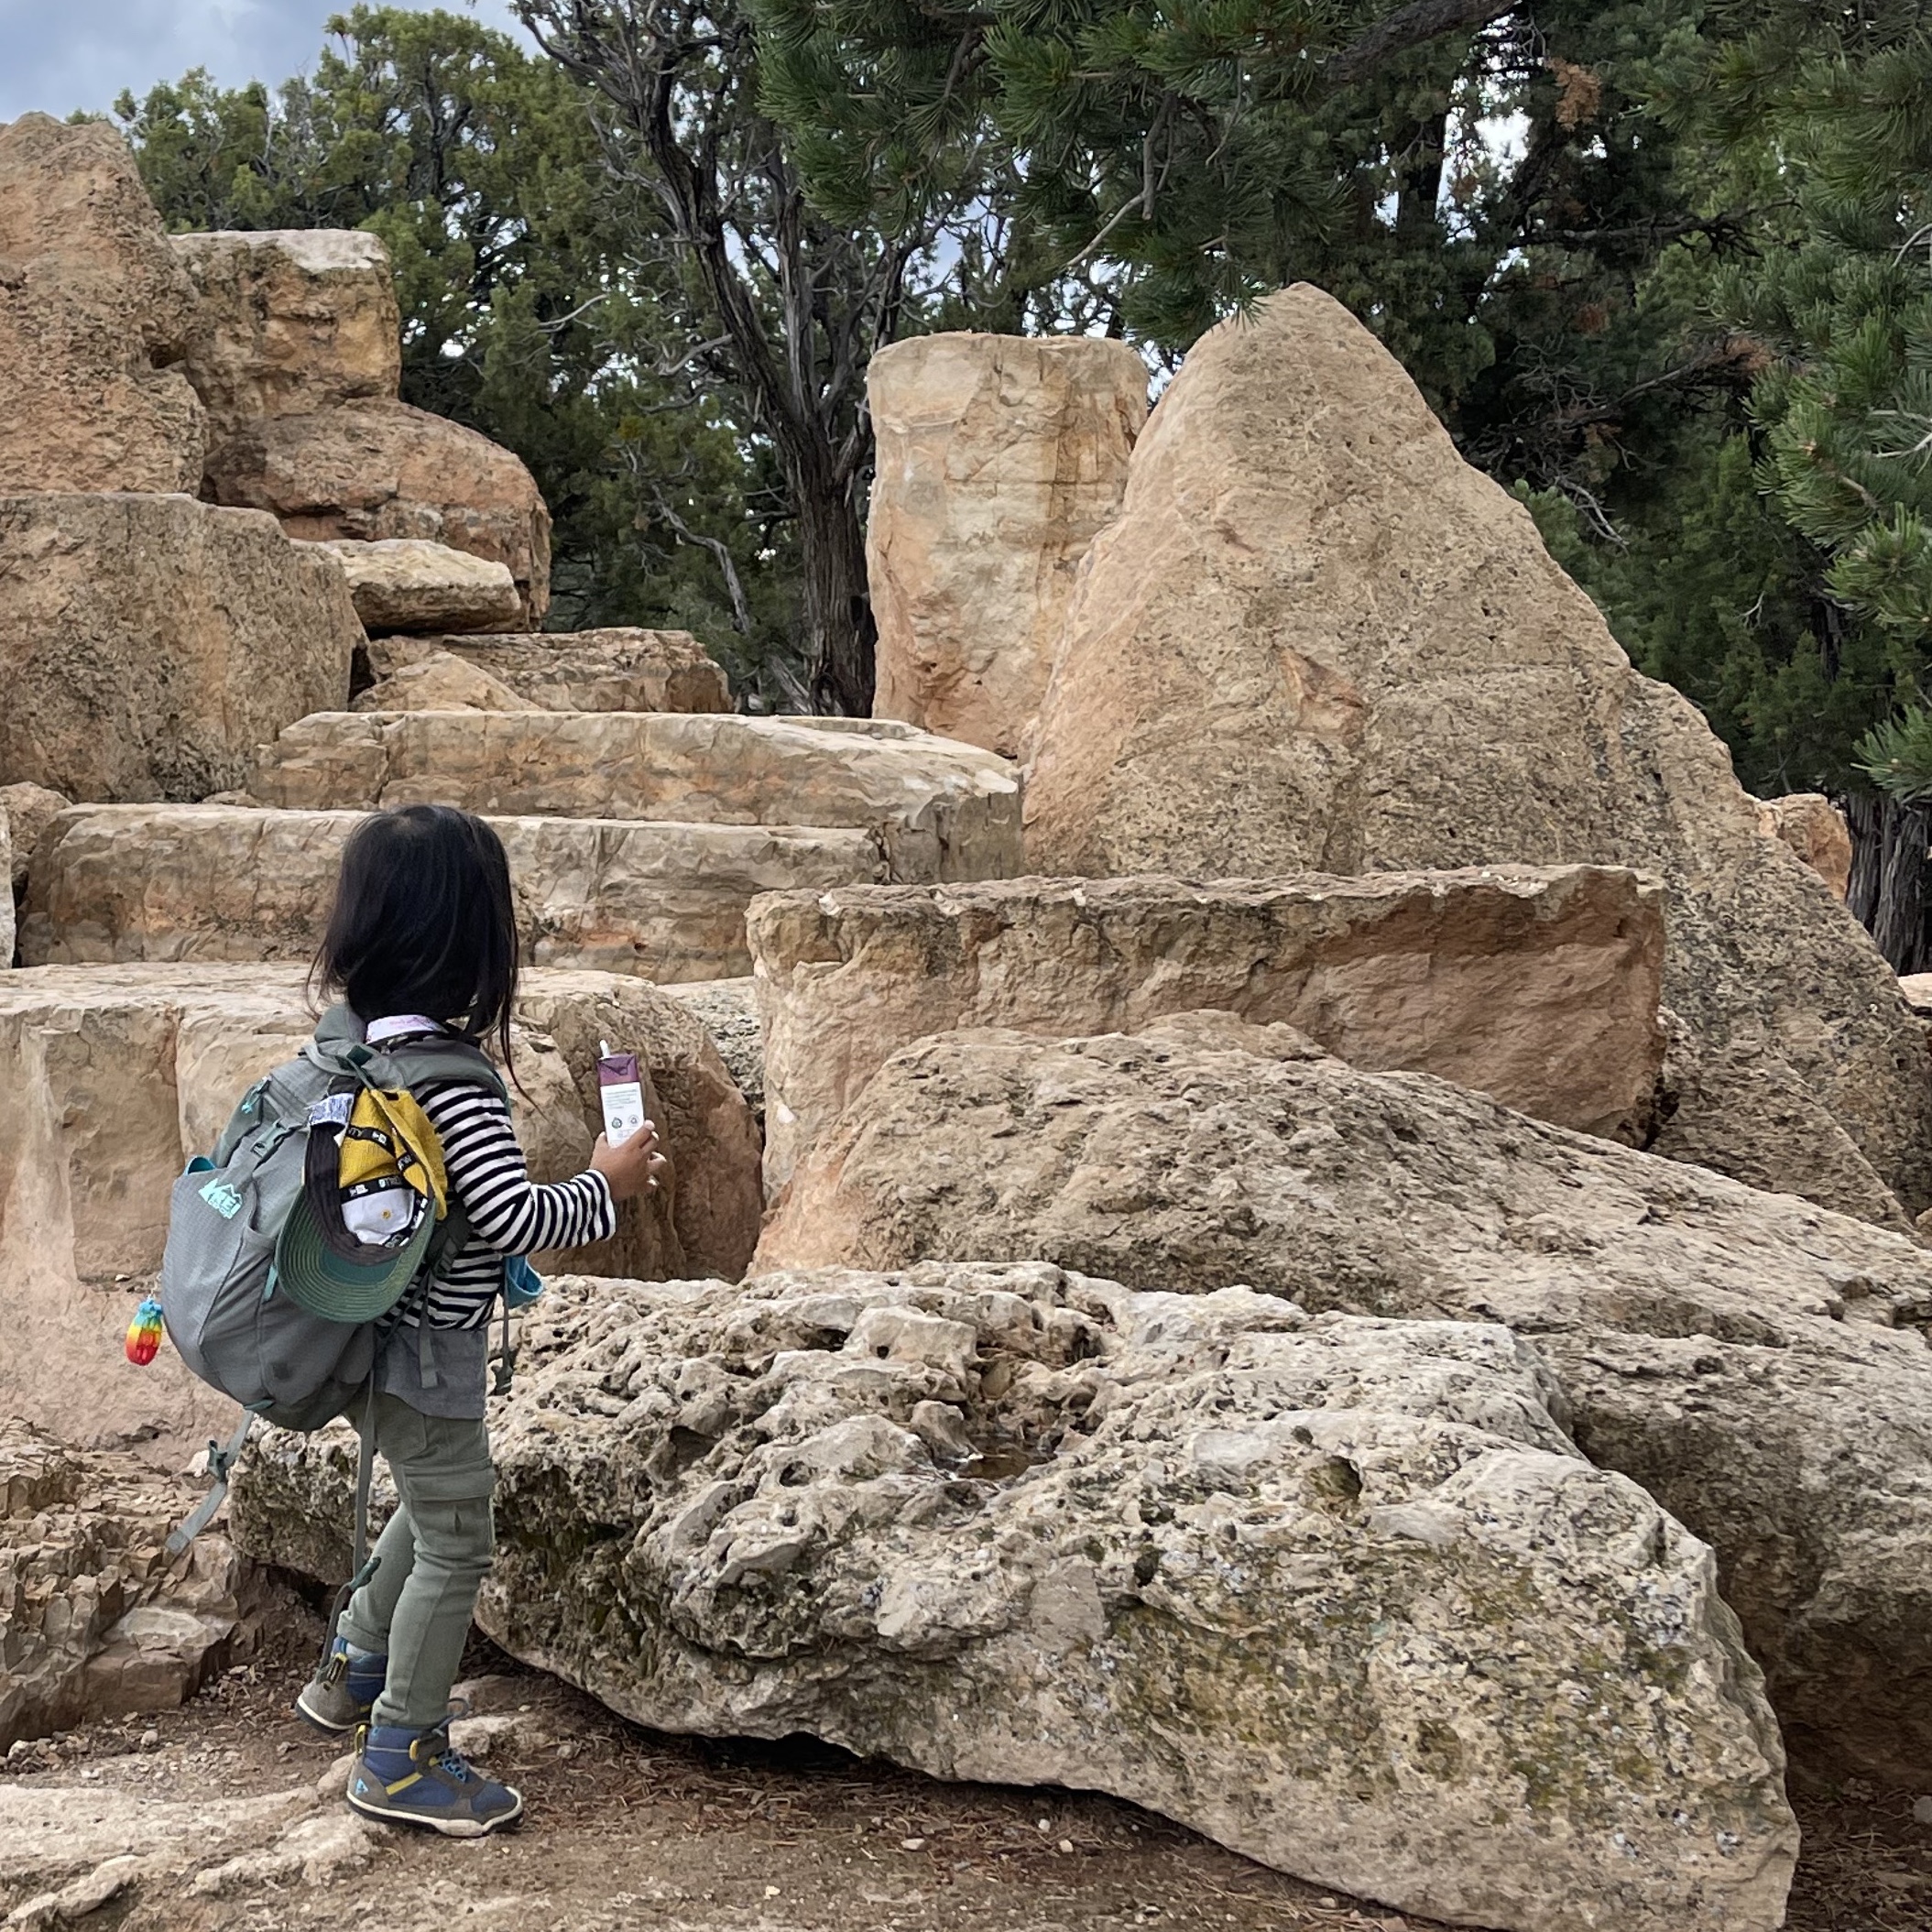 A child holding a juice box walks up boulders at Mather Point at the Grand Canyon.